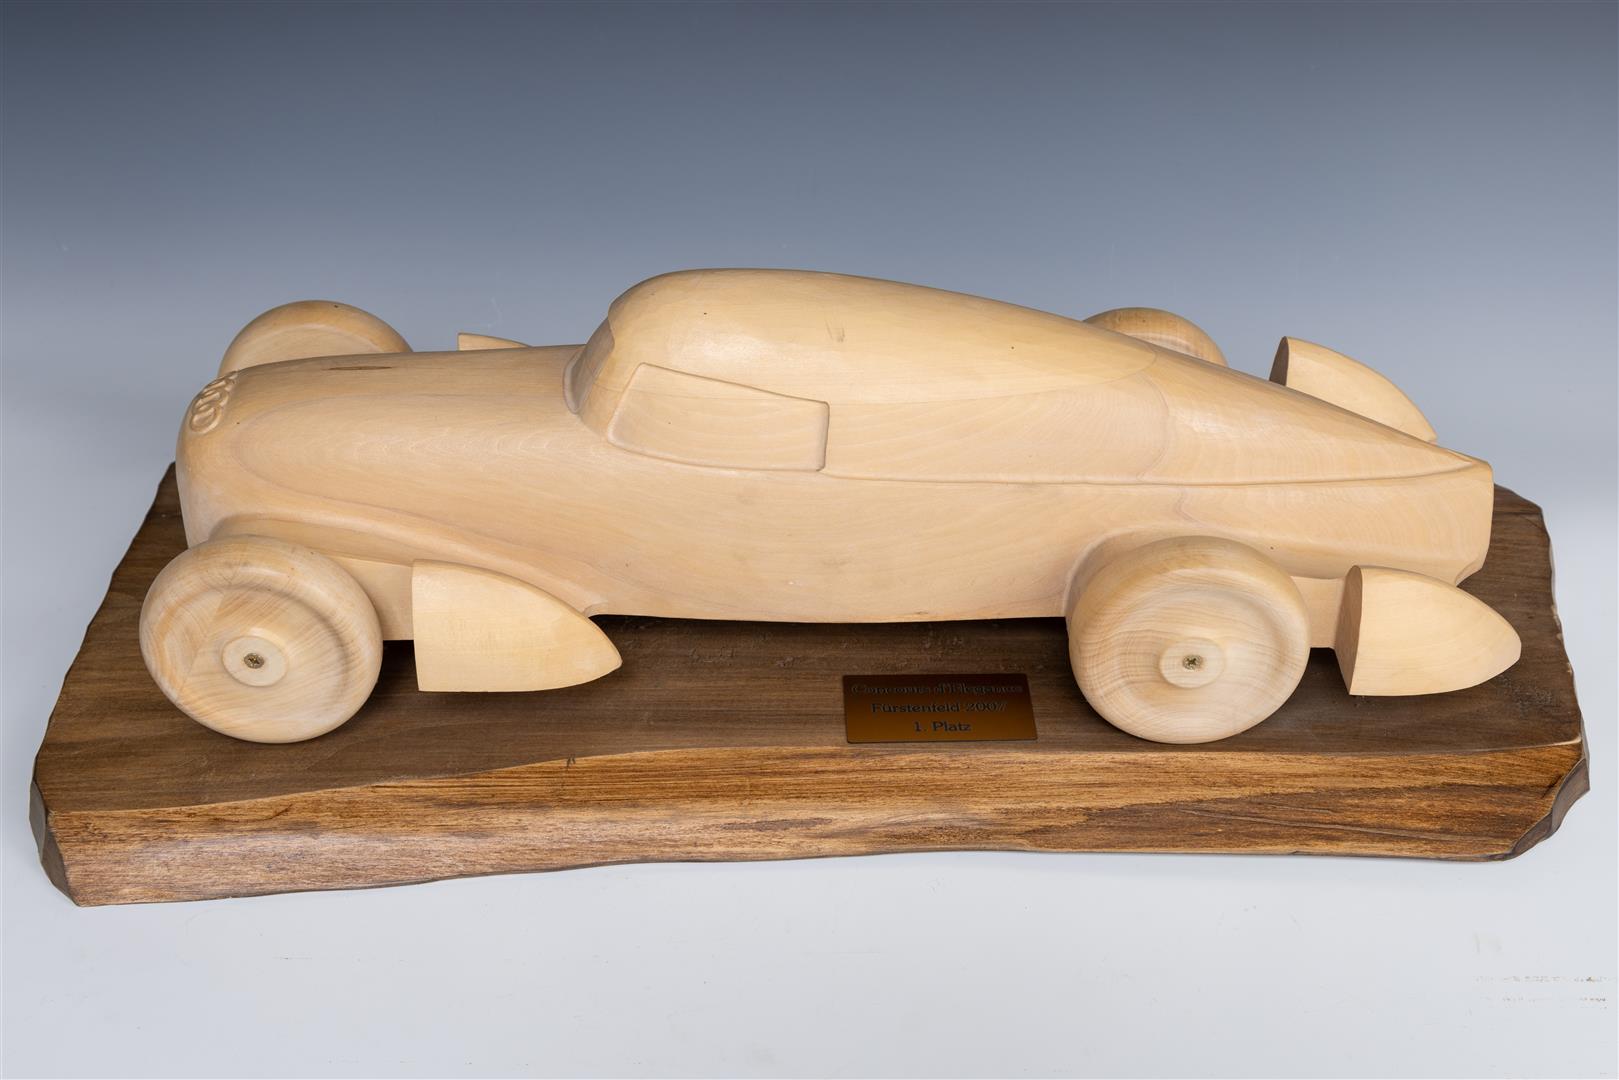 A wooden carving depicting Auto Union silber pfeil, prize for Cours d'elegance, 2007. - Image 2 of 2